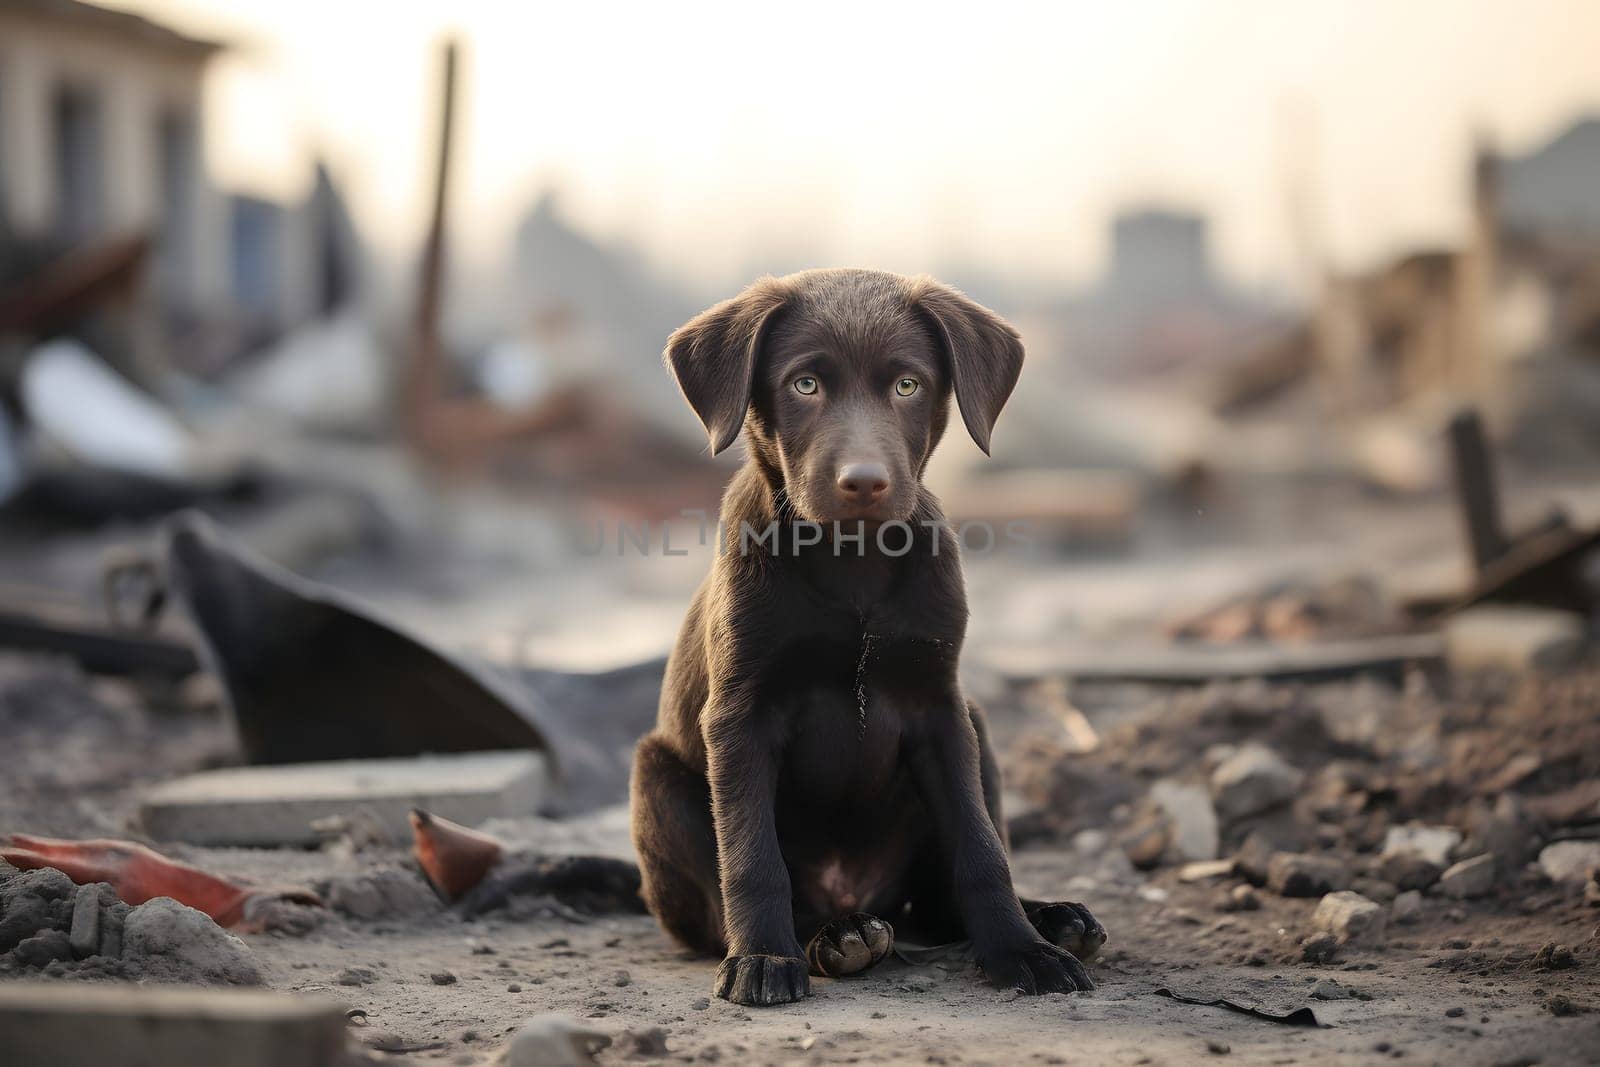 Alone wet and dirty Labrador Retriever puppy after disaster on the background of house rubble. Neural network generated image. Not based on any actual scene.